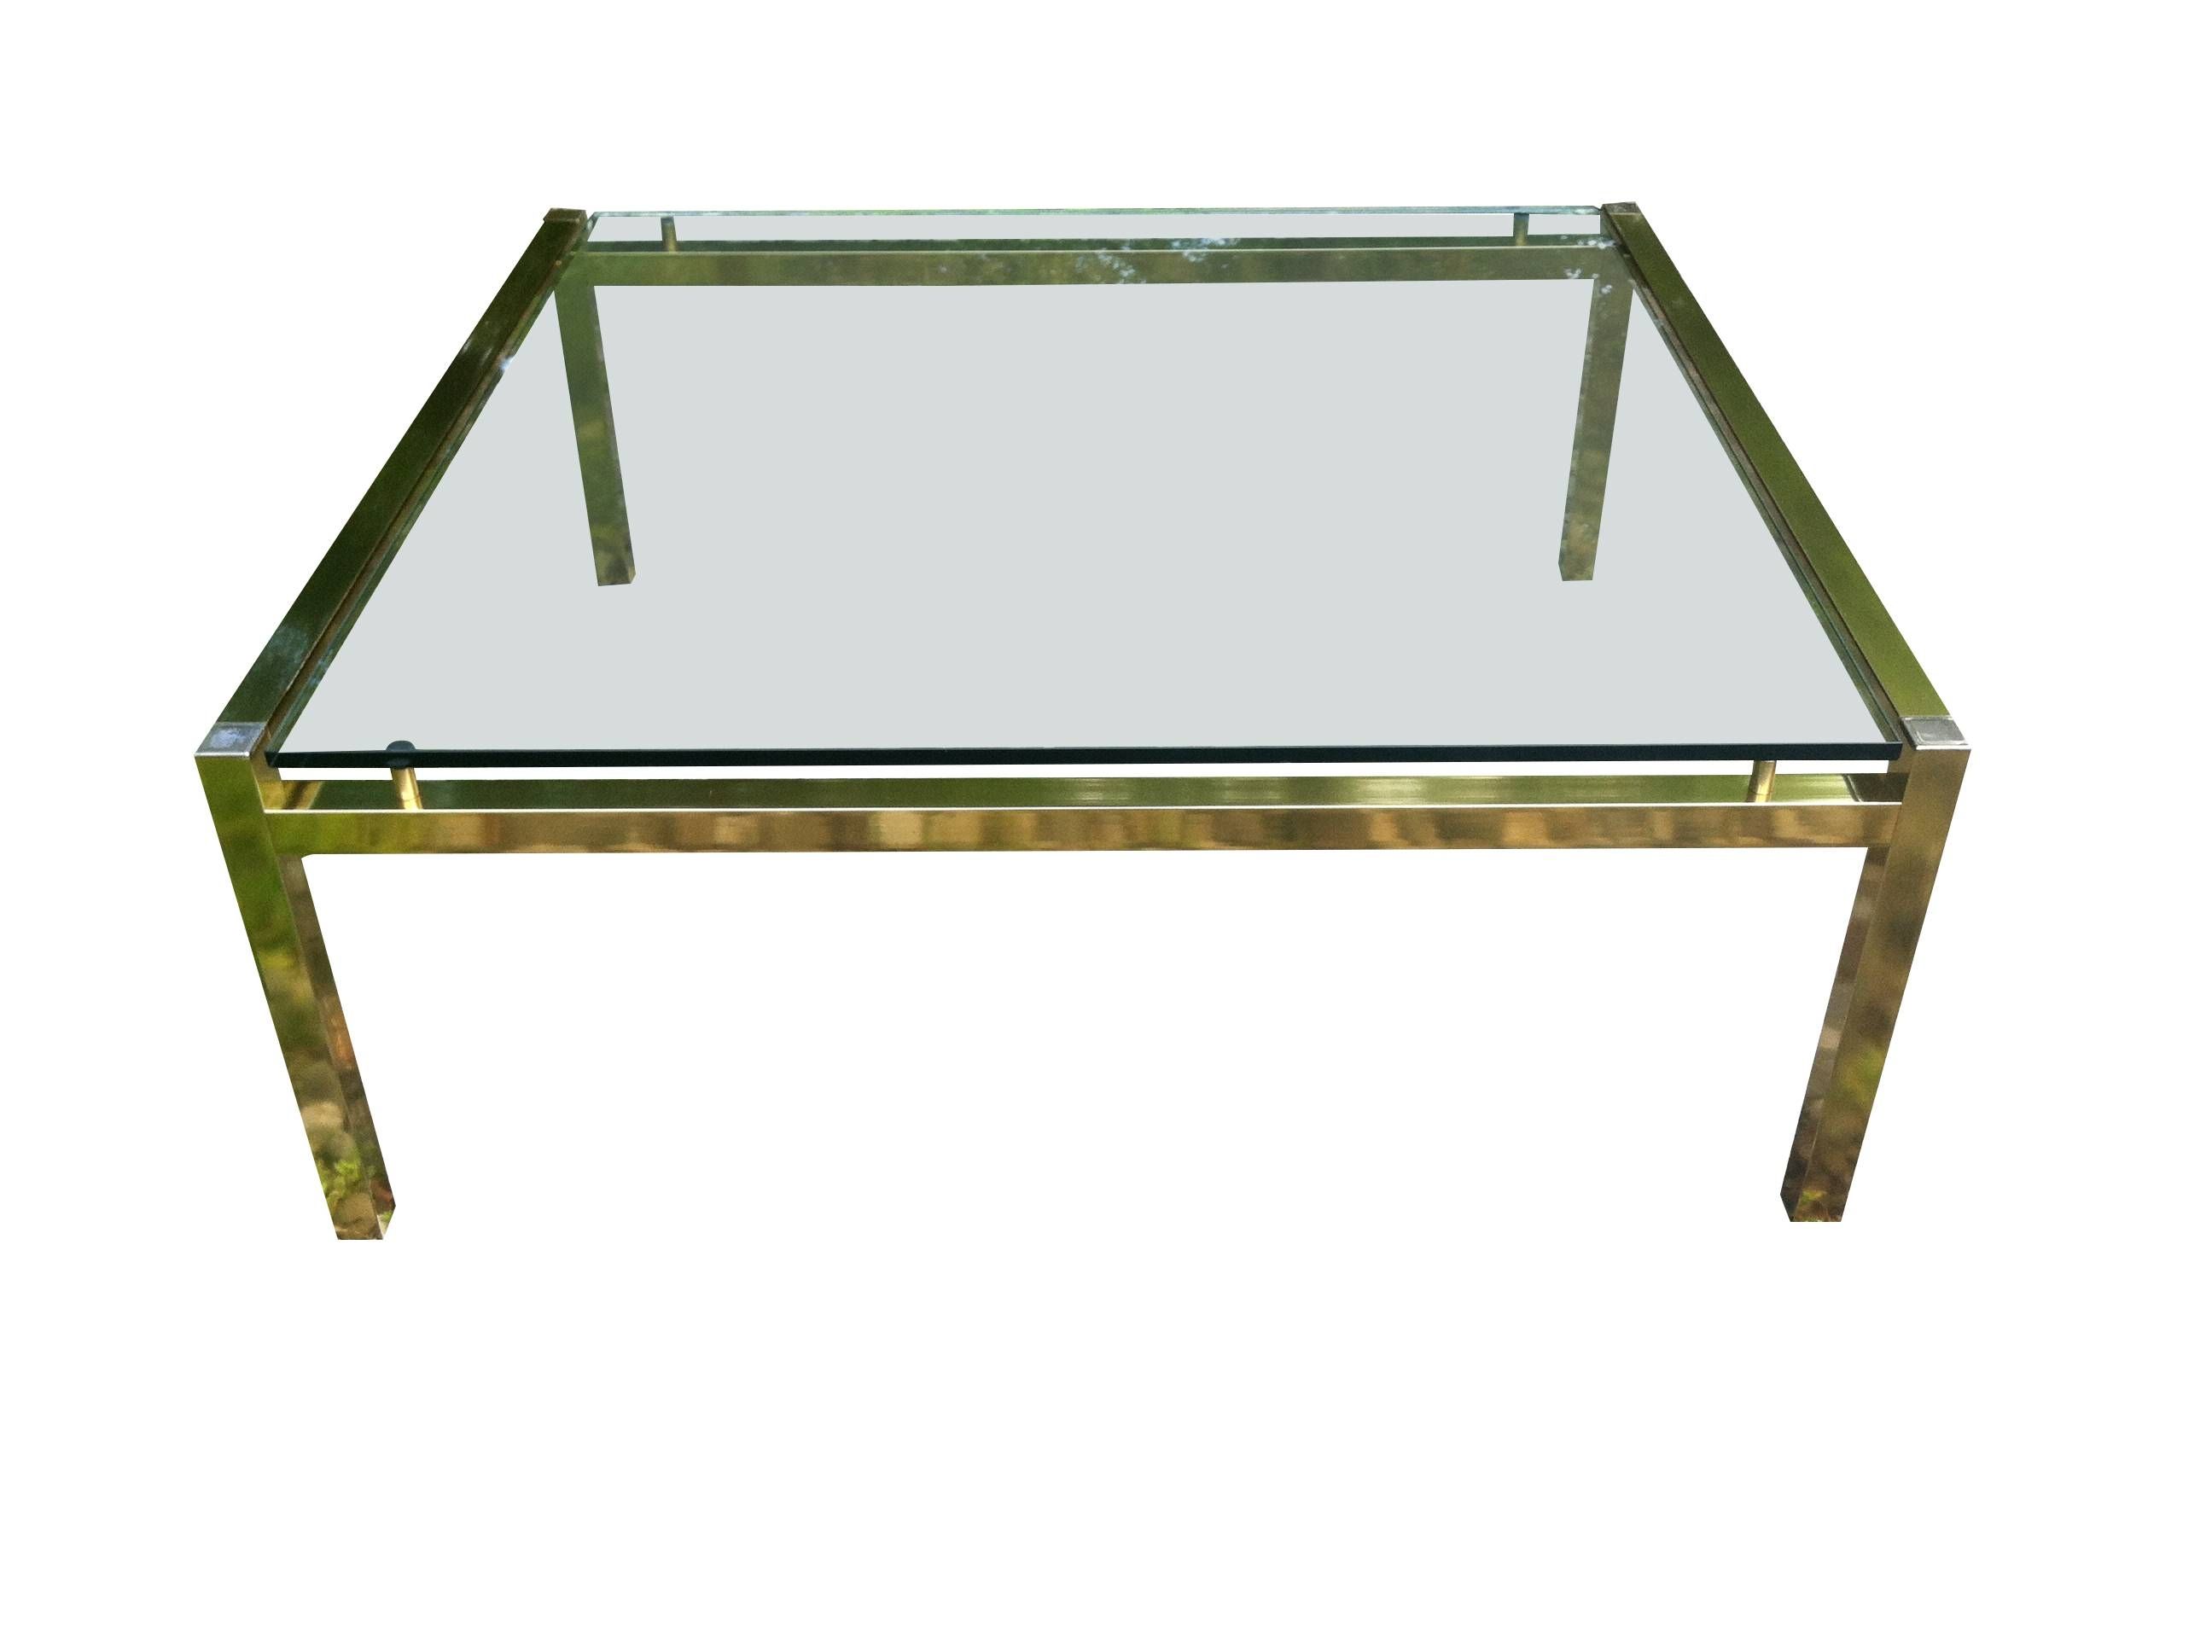 70s Brass Coffee Table With Floating Glass | Omero Home For Floating Glass Coffee Tables (View 10 of 30)